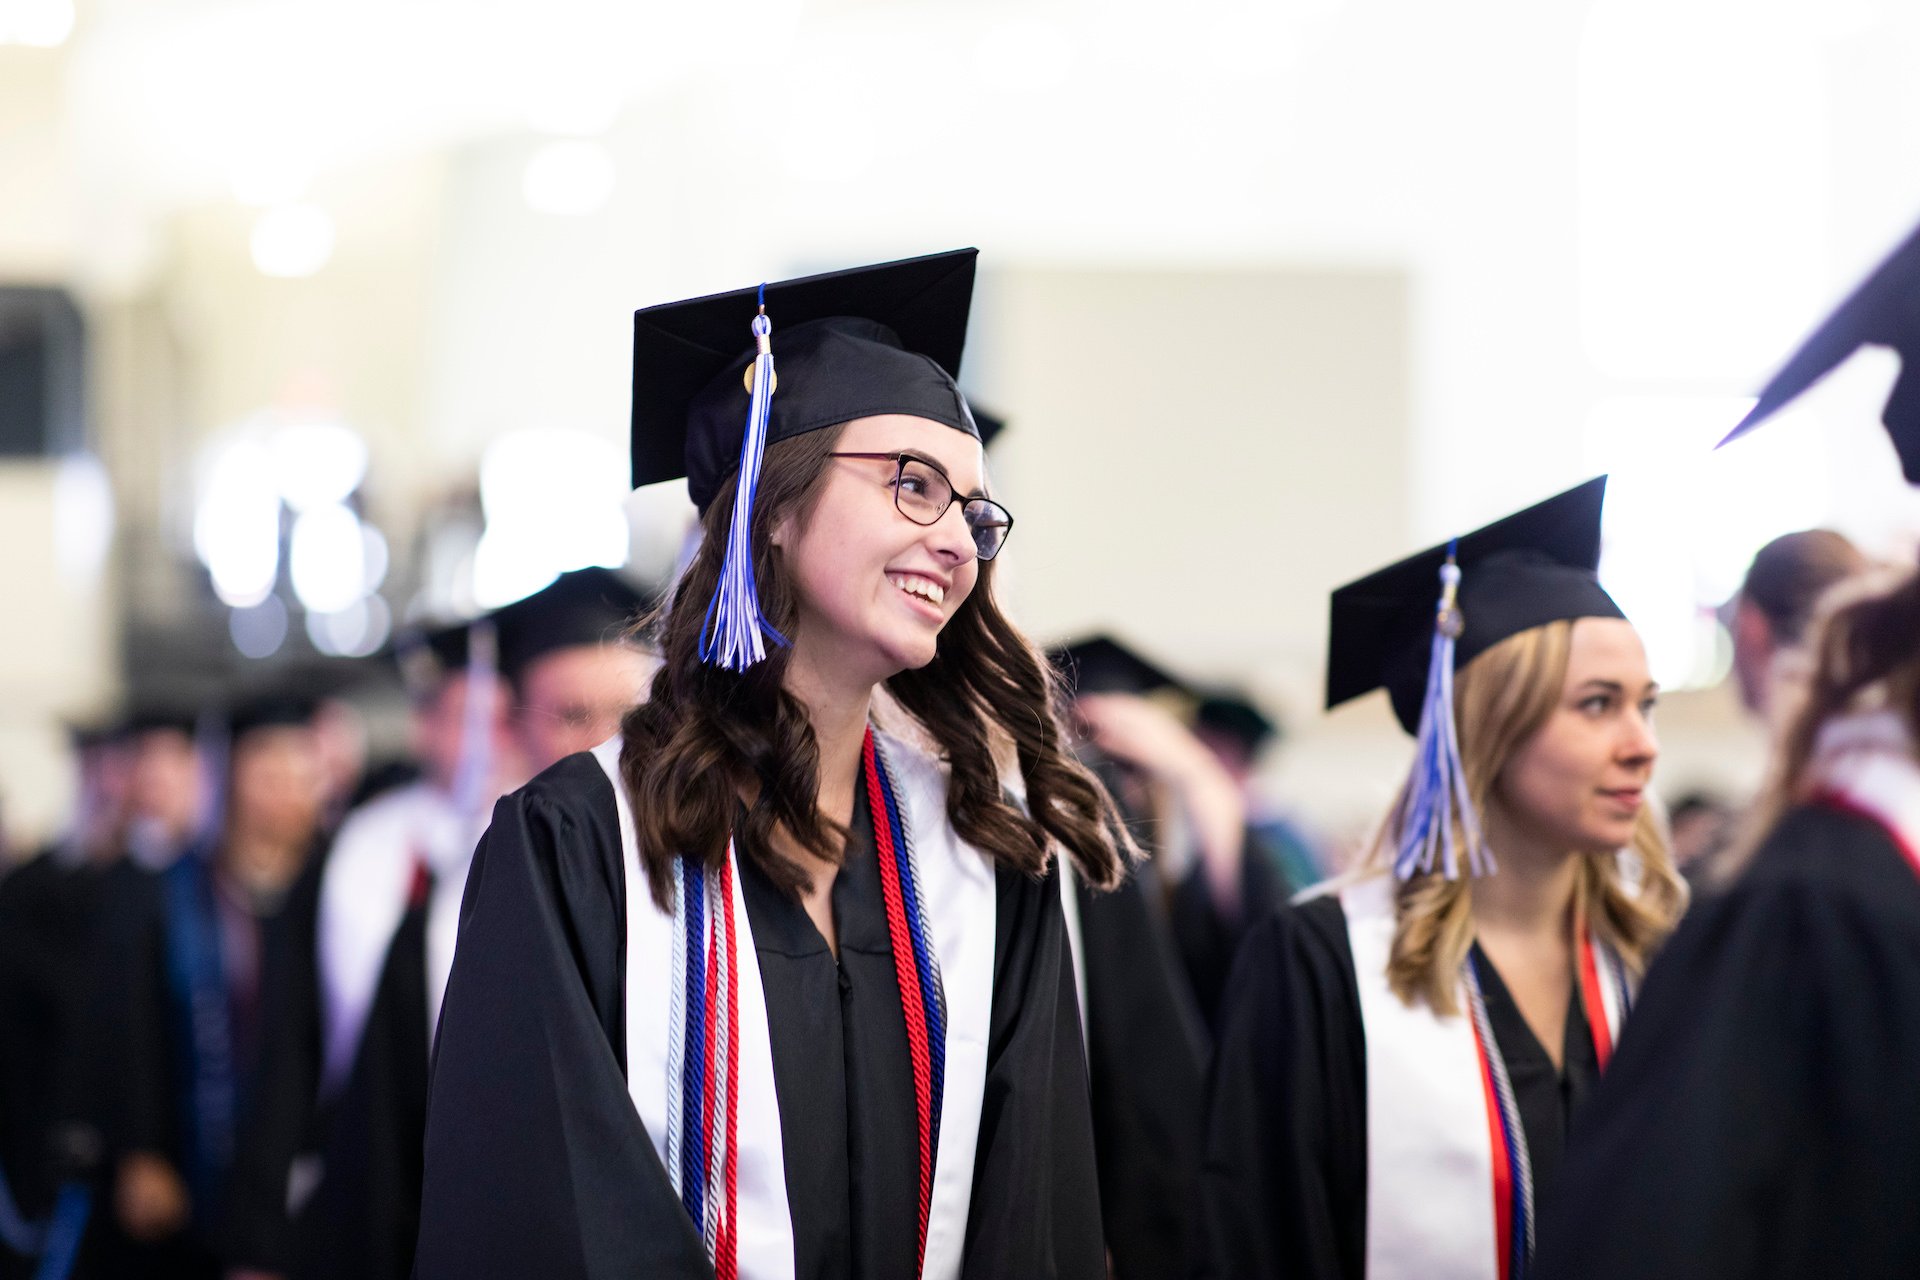 20190511 HillsdaleCollege Commencement Prev06 ?width=1920&name=20190511 HillsdaleCollege Commencement Prev06 